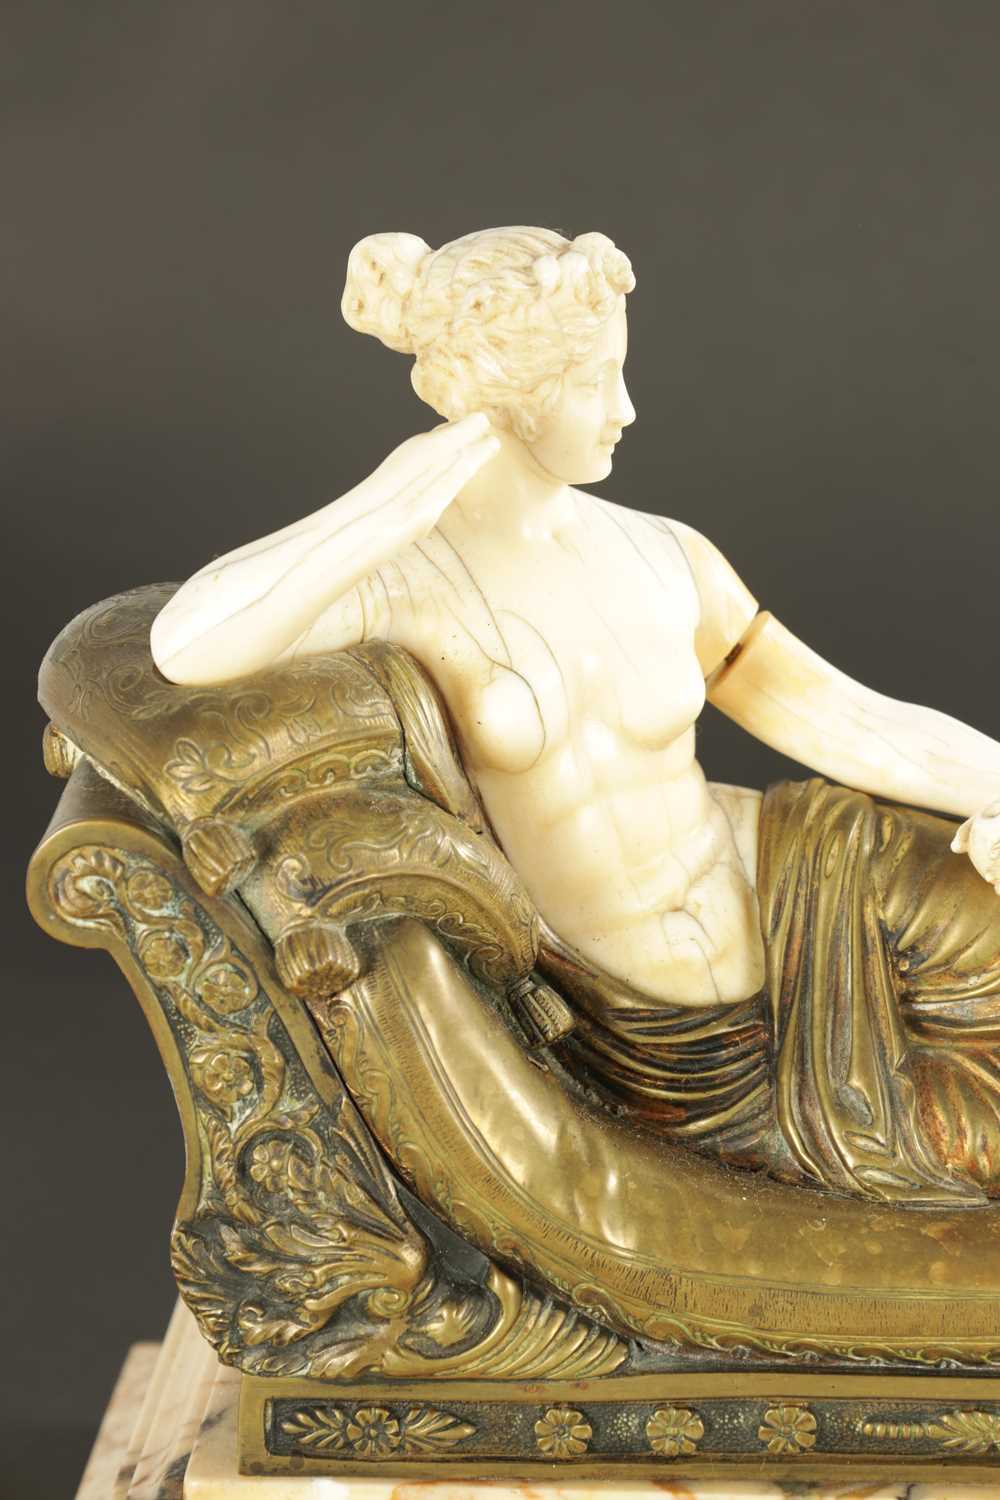 ANTONIO CANOVA (1757 - 1822). A GOOD REGENCY CARVED IVORY, BRONZE AND SIENNA MARBLE SCULPTURE - Image 3 of 7